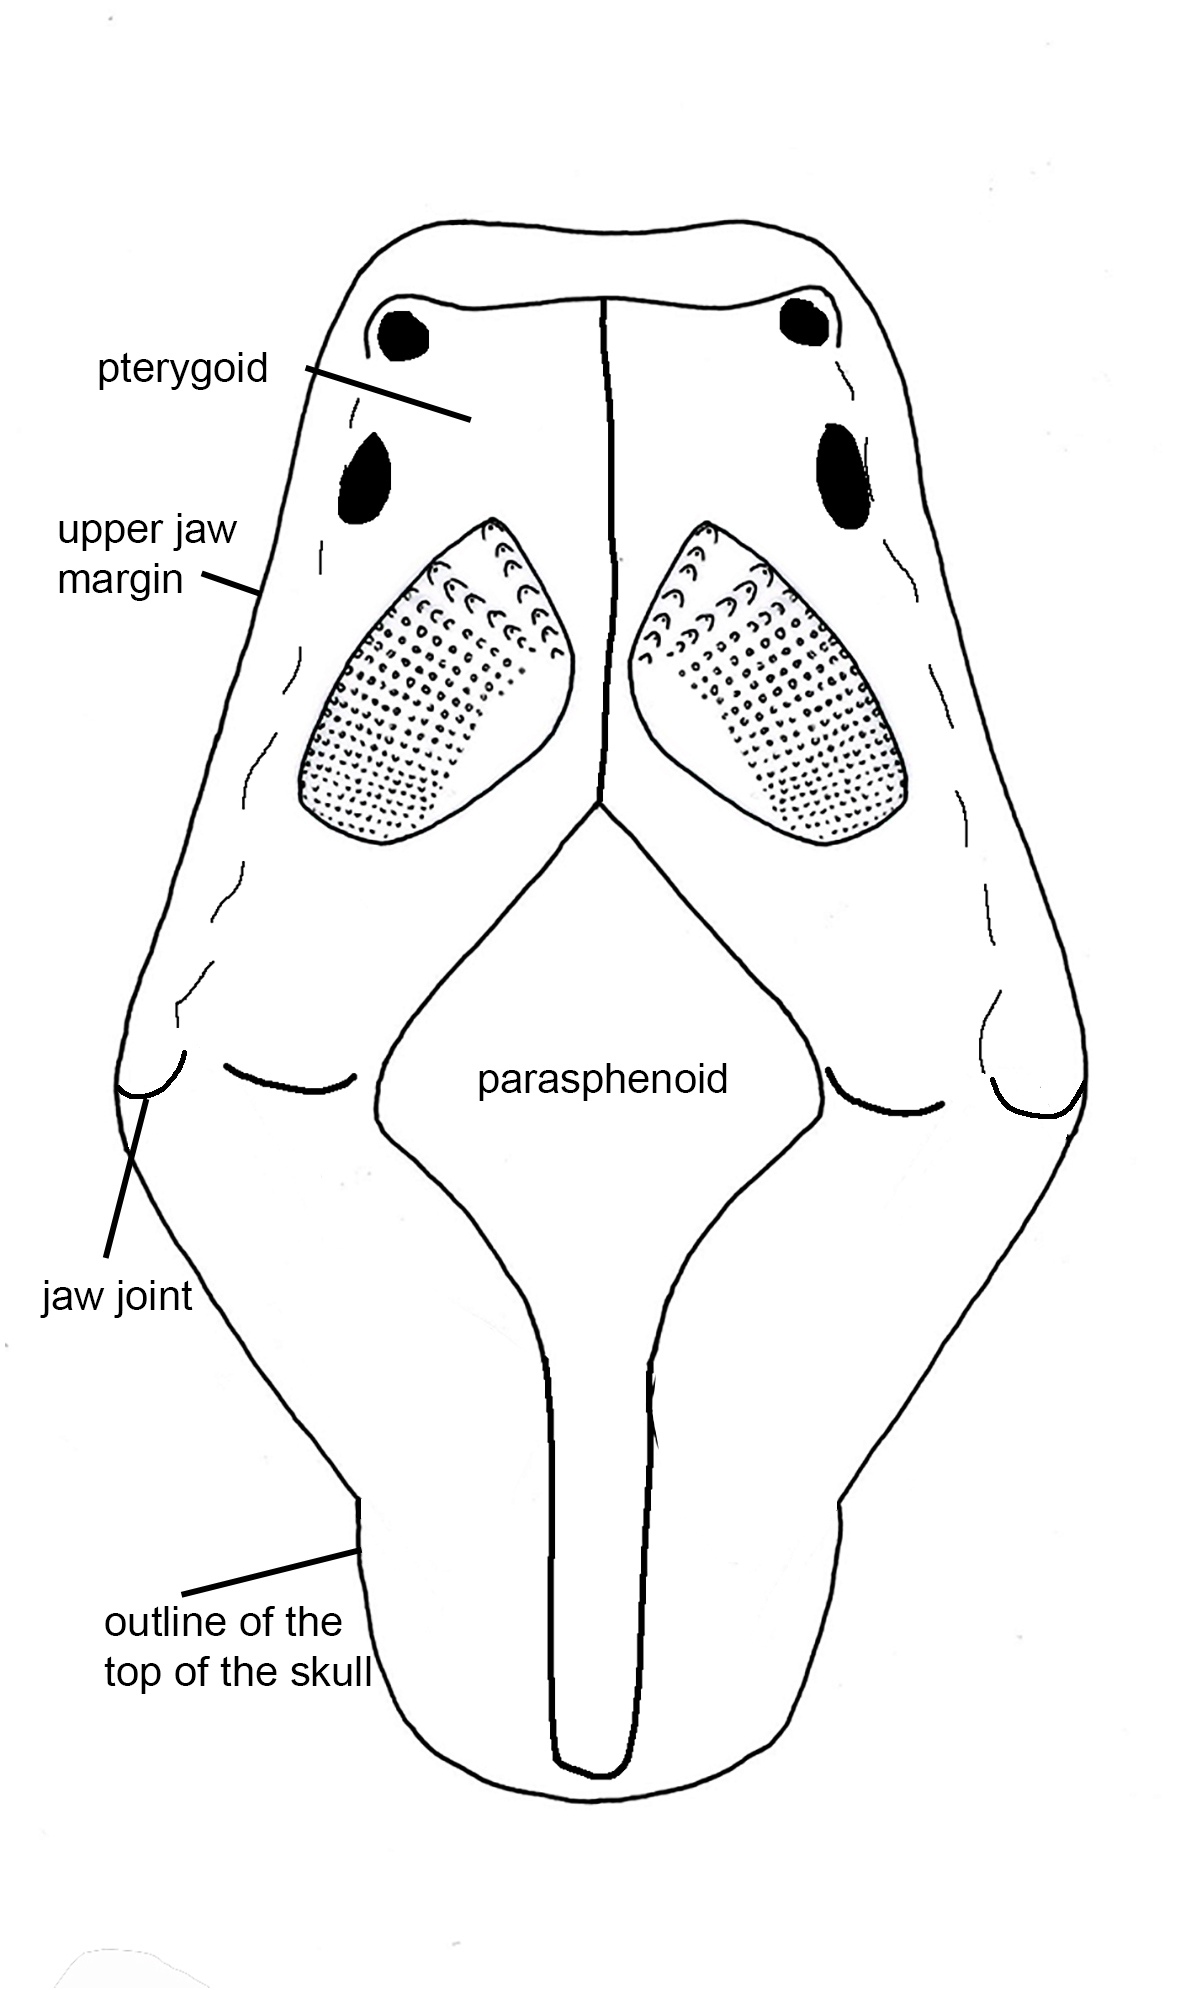 Diagram of lungfish palate